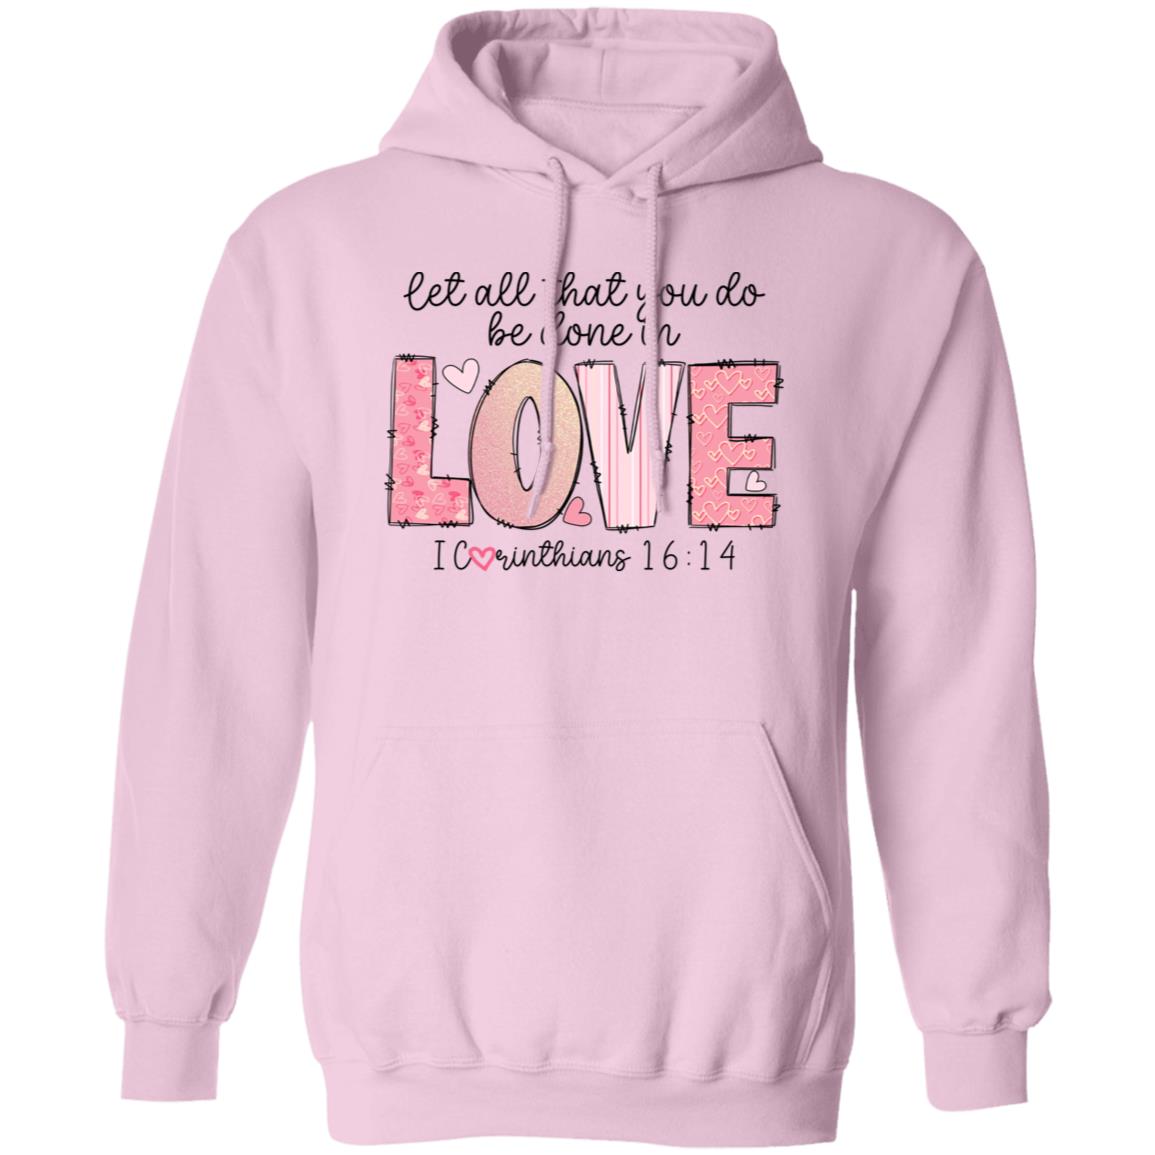 Let All That you do be done with Love Pullover Hoodie